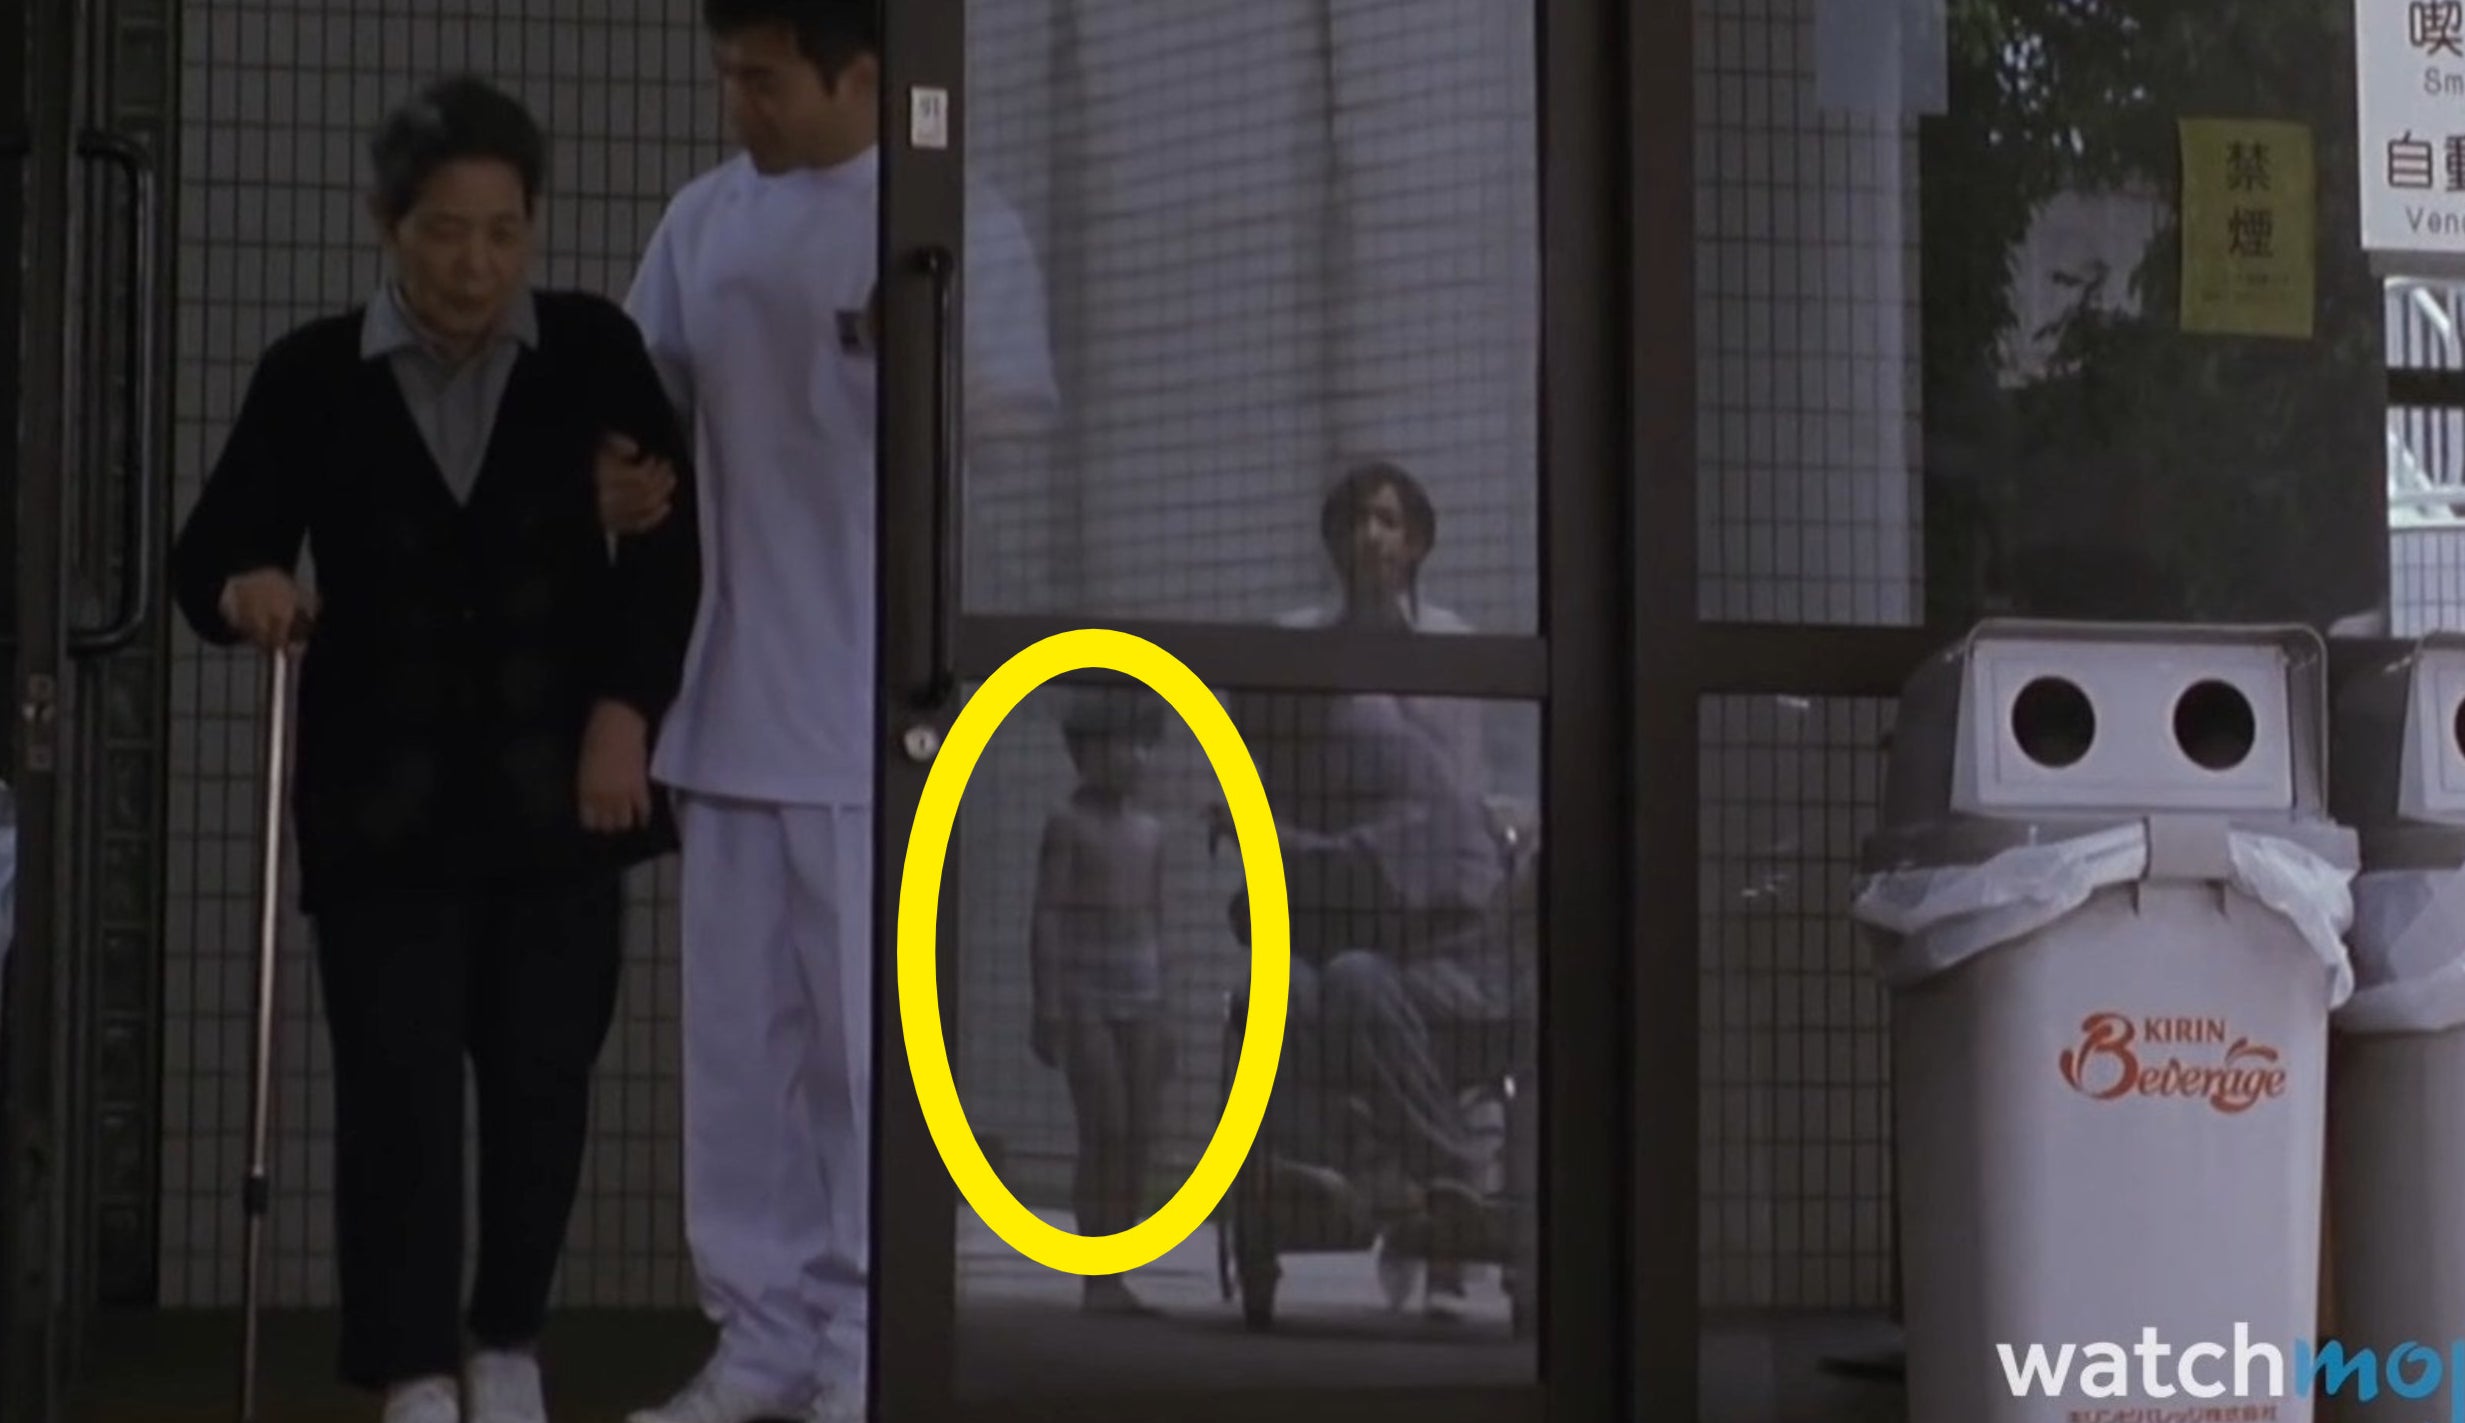 Saito seen in the reflection of a glass door with Toshio in &quot;Ju-on: The Grudge&quot;